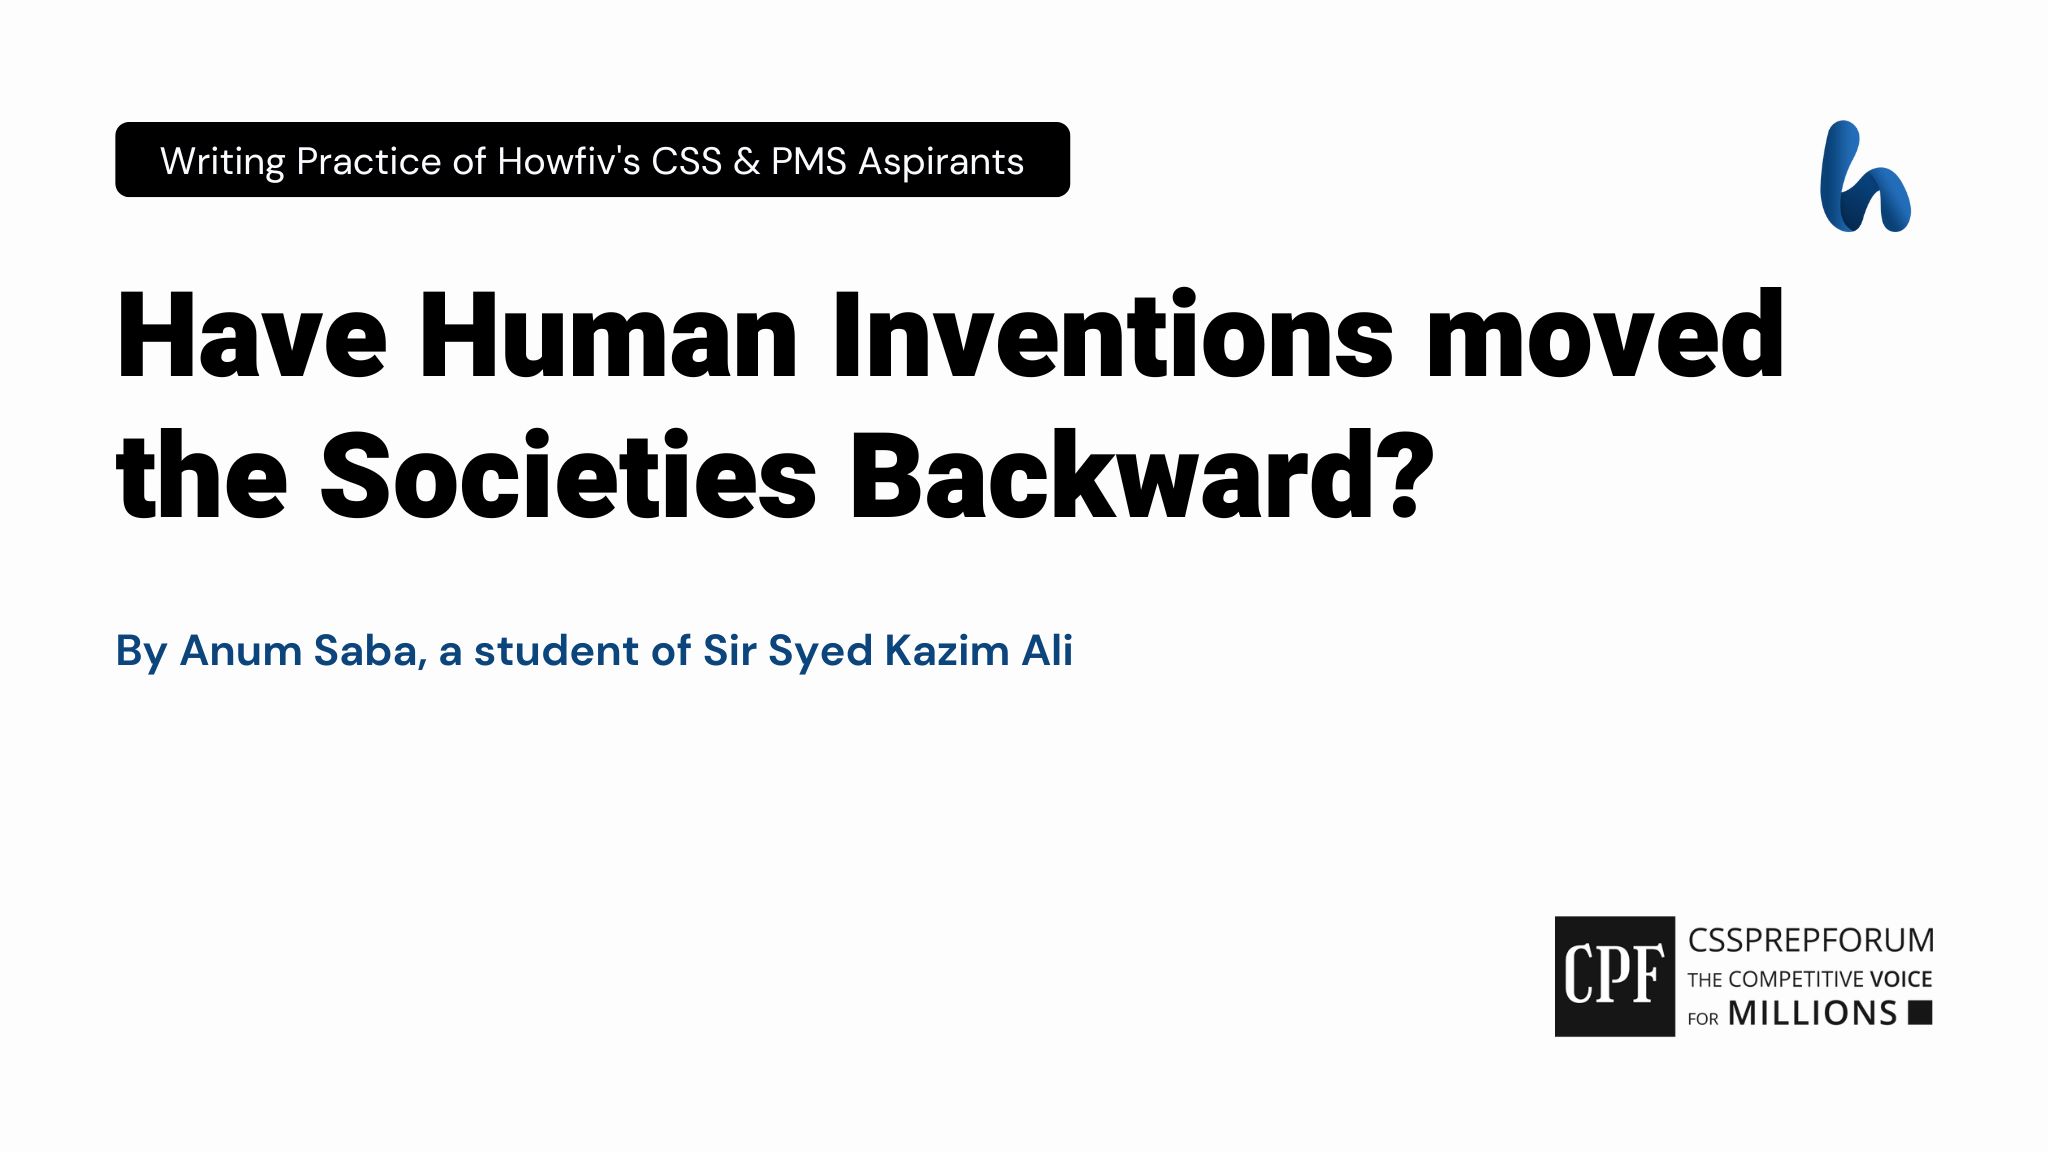 Have Human Inventions Moved The Societies Backward? by Anum Saba